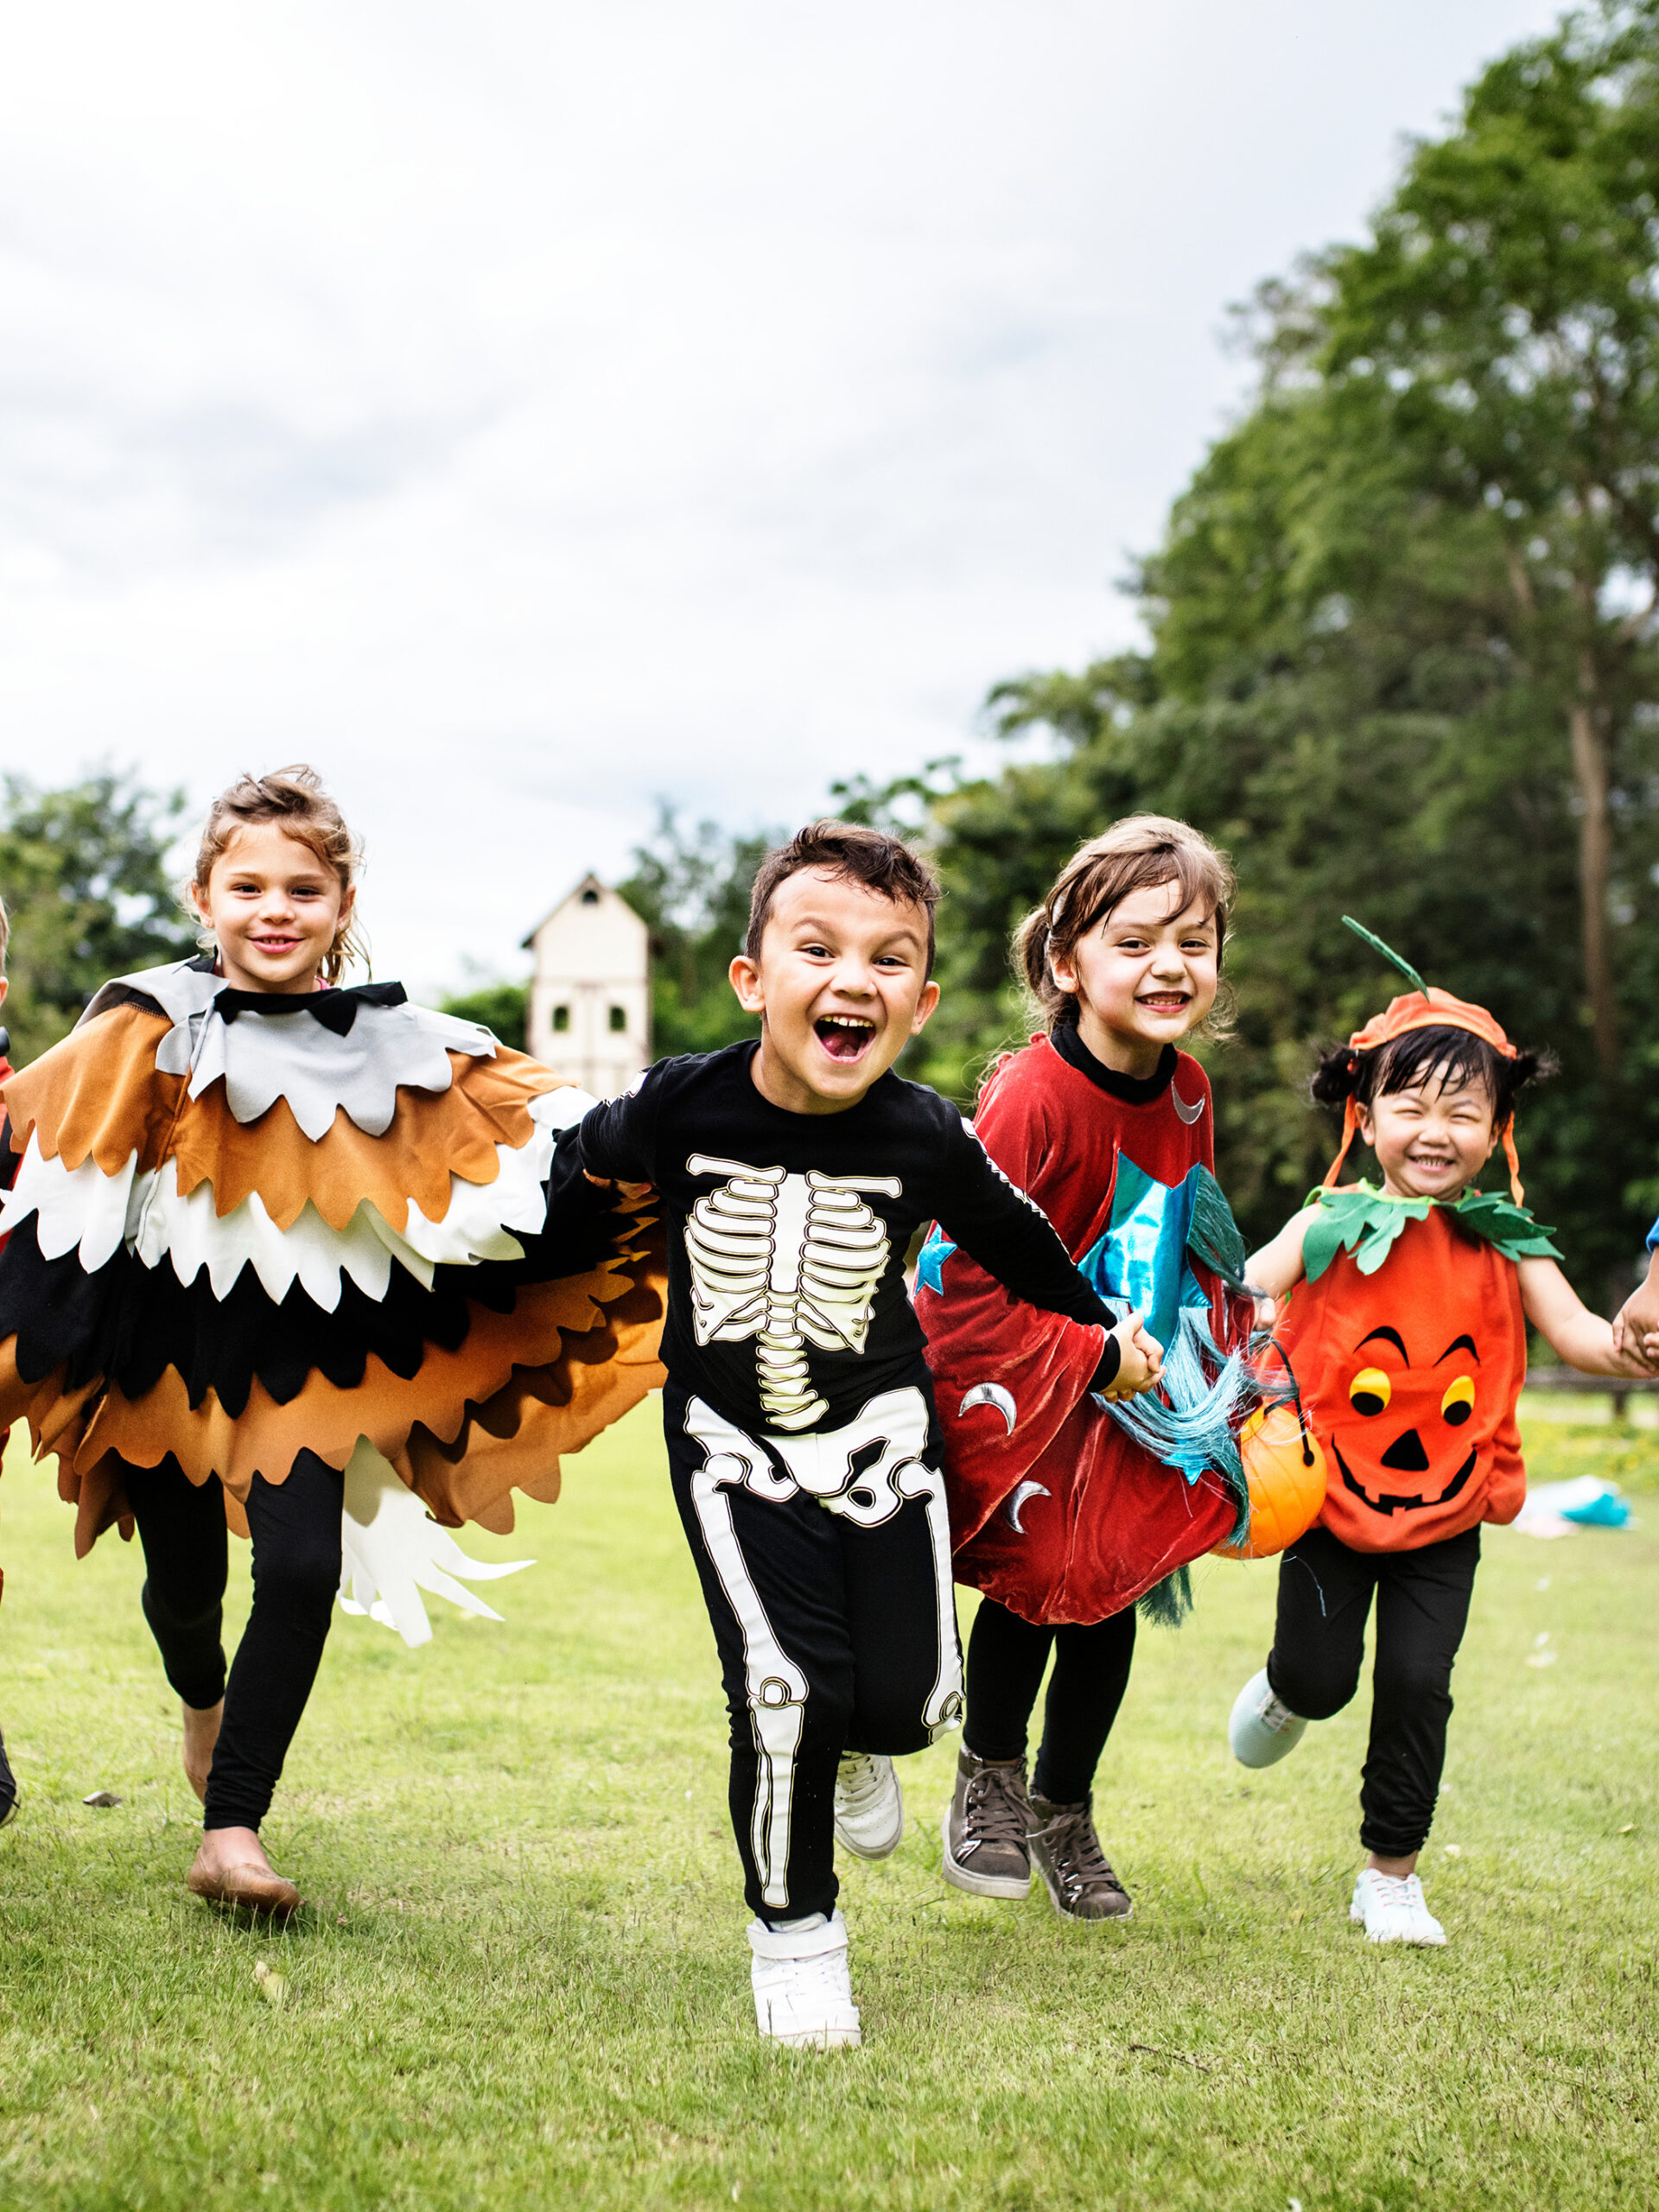 Halloween tips for your child with autism spectrum disorder (ASD)